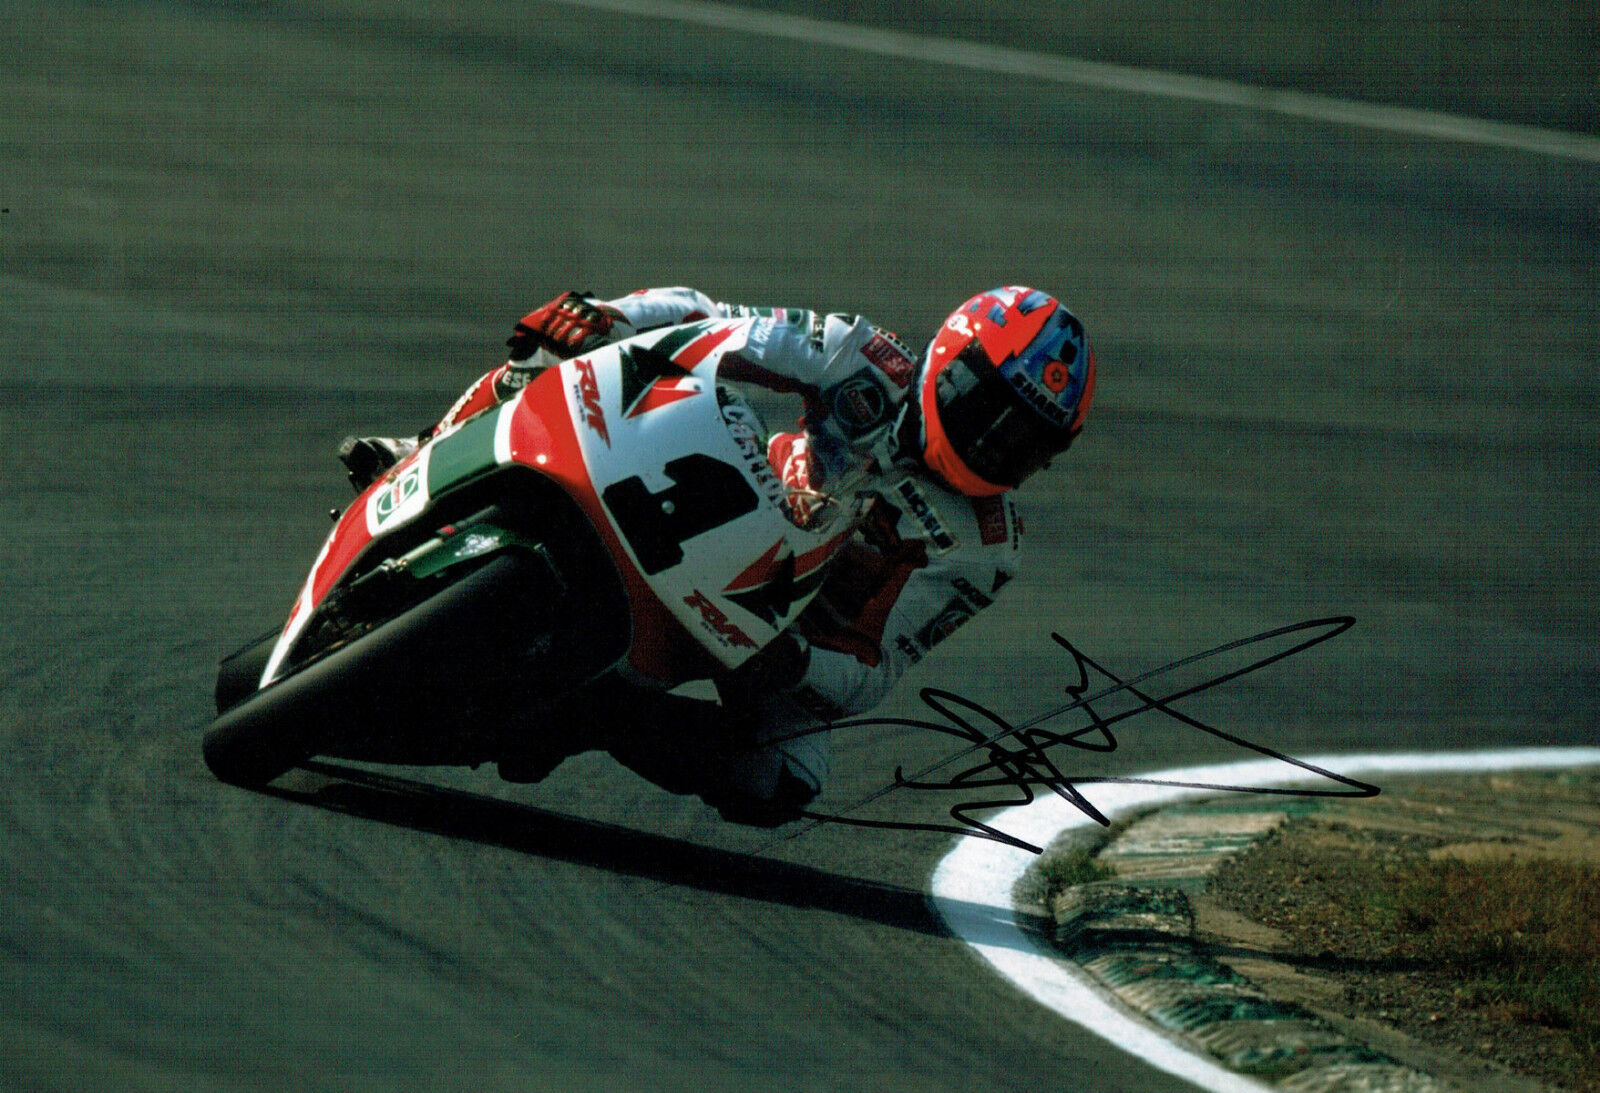 Carl FOGARTY SIGNED Autograph 12x8 Photo Poster painting AFTAL COA Castrol HONDA Rider